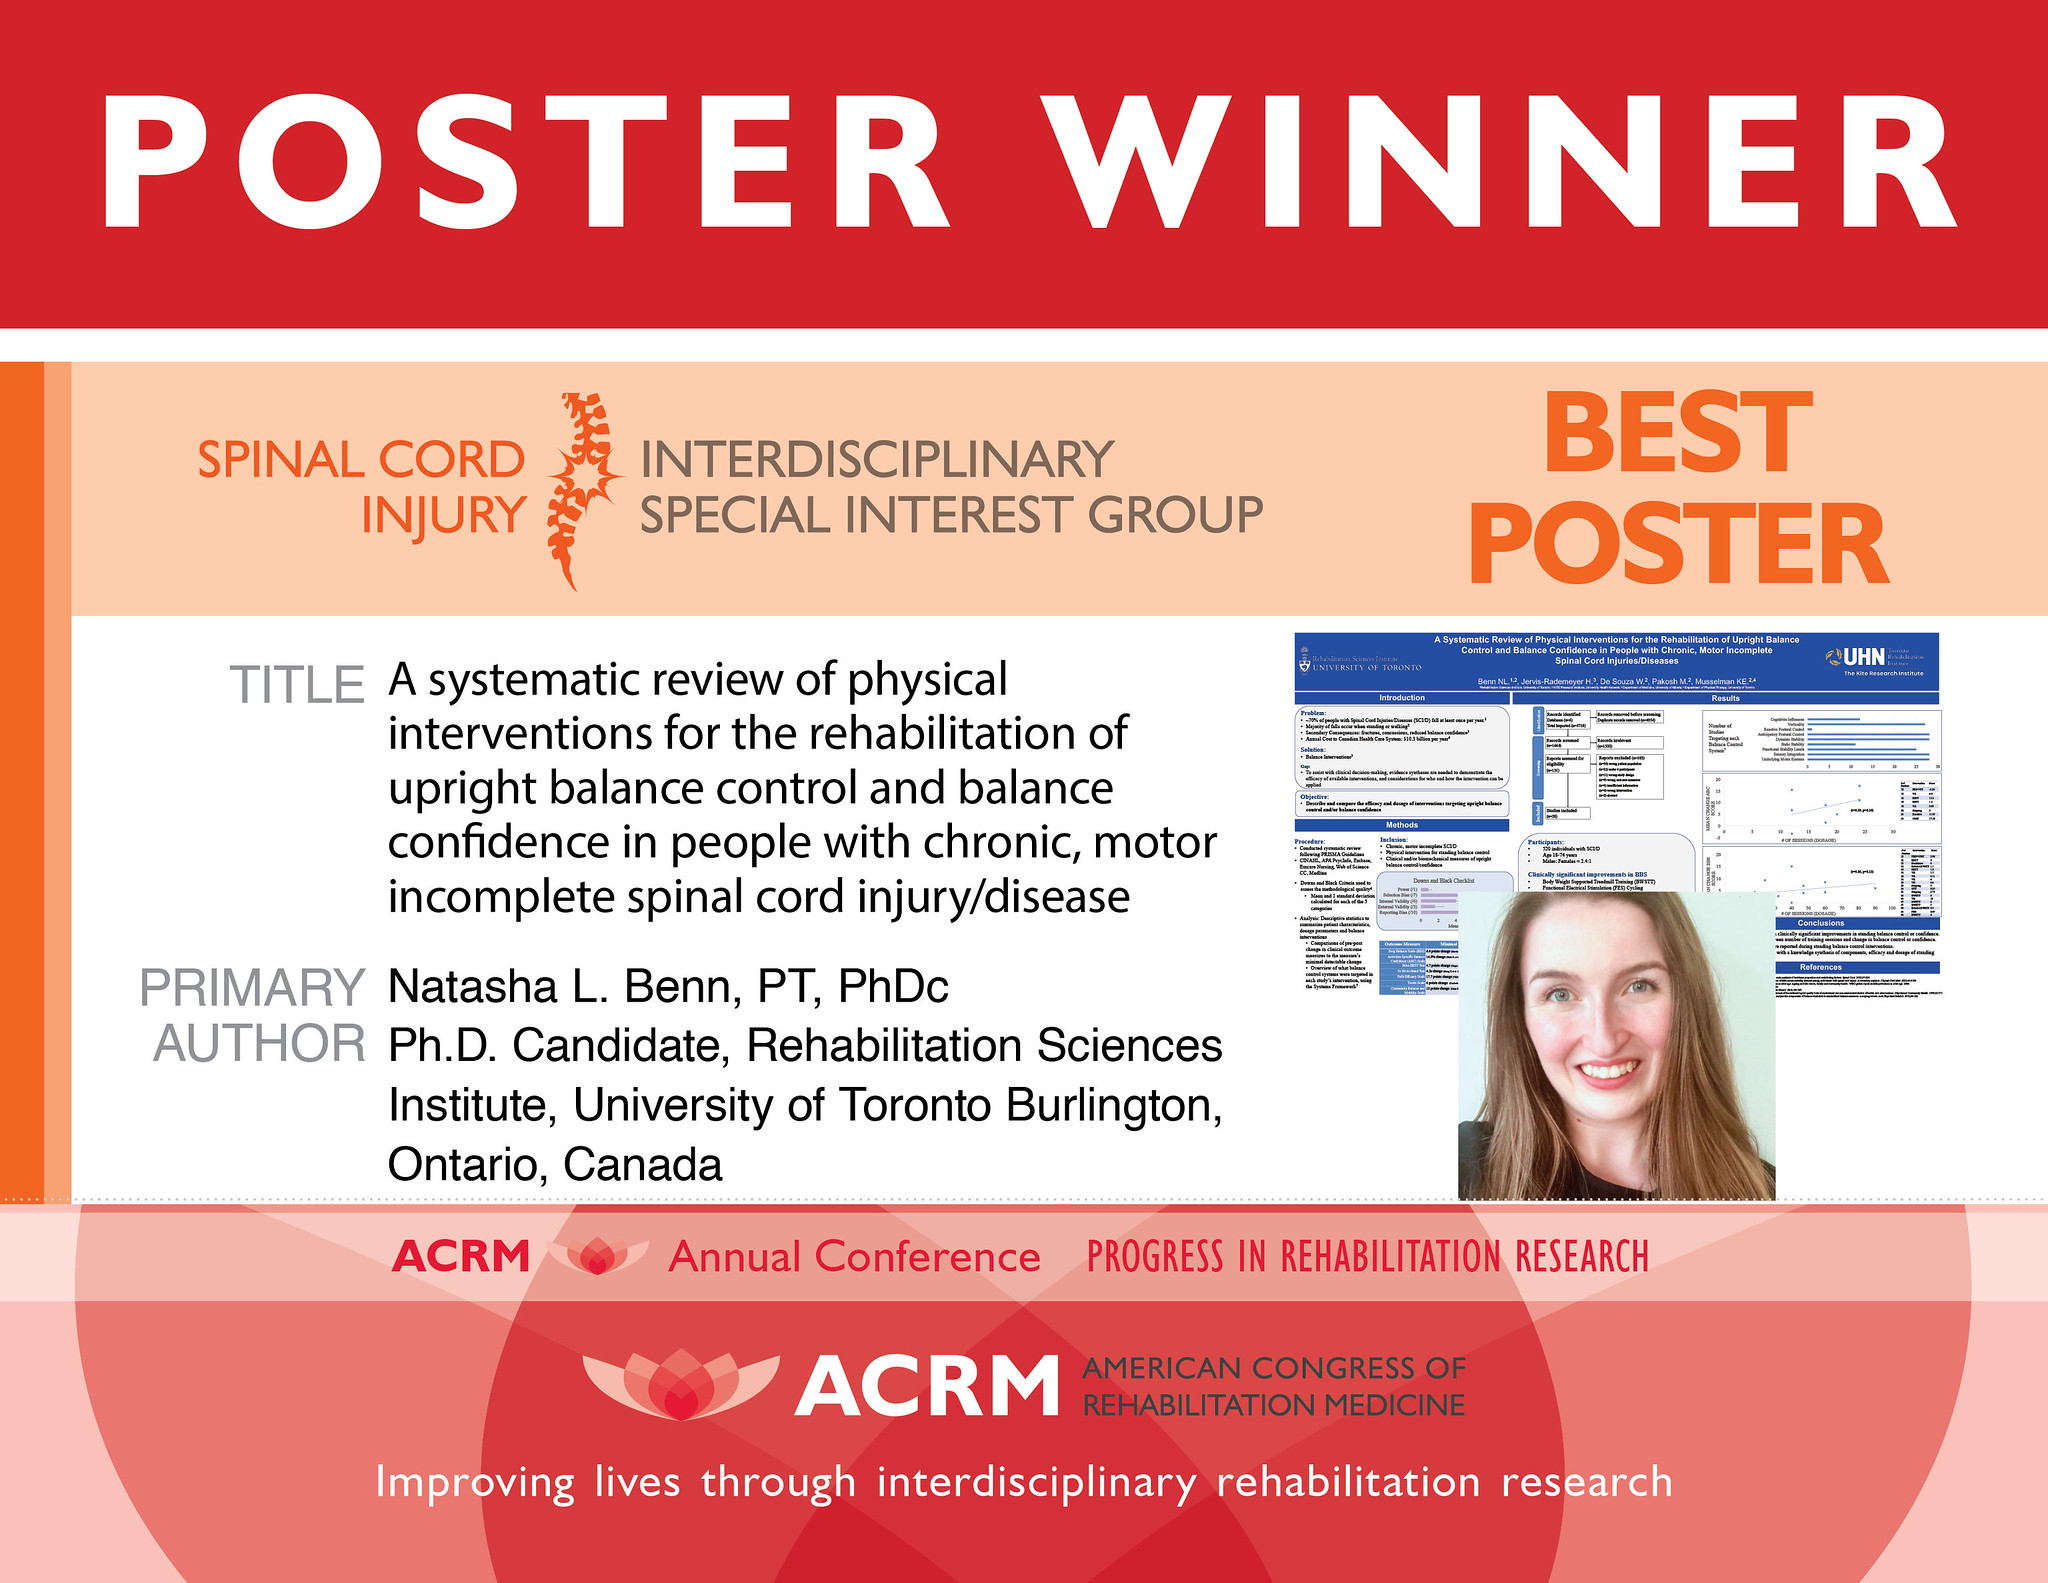 Spinal Cord Injury ISIG Best Poster